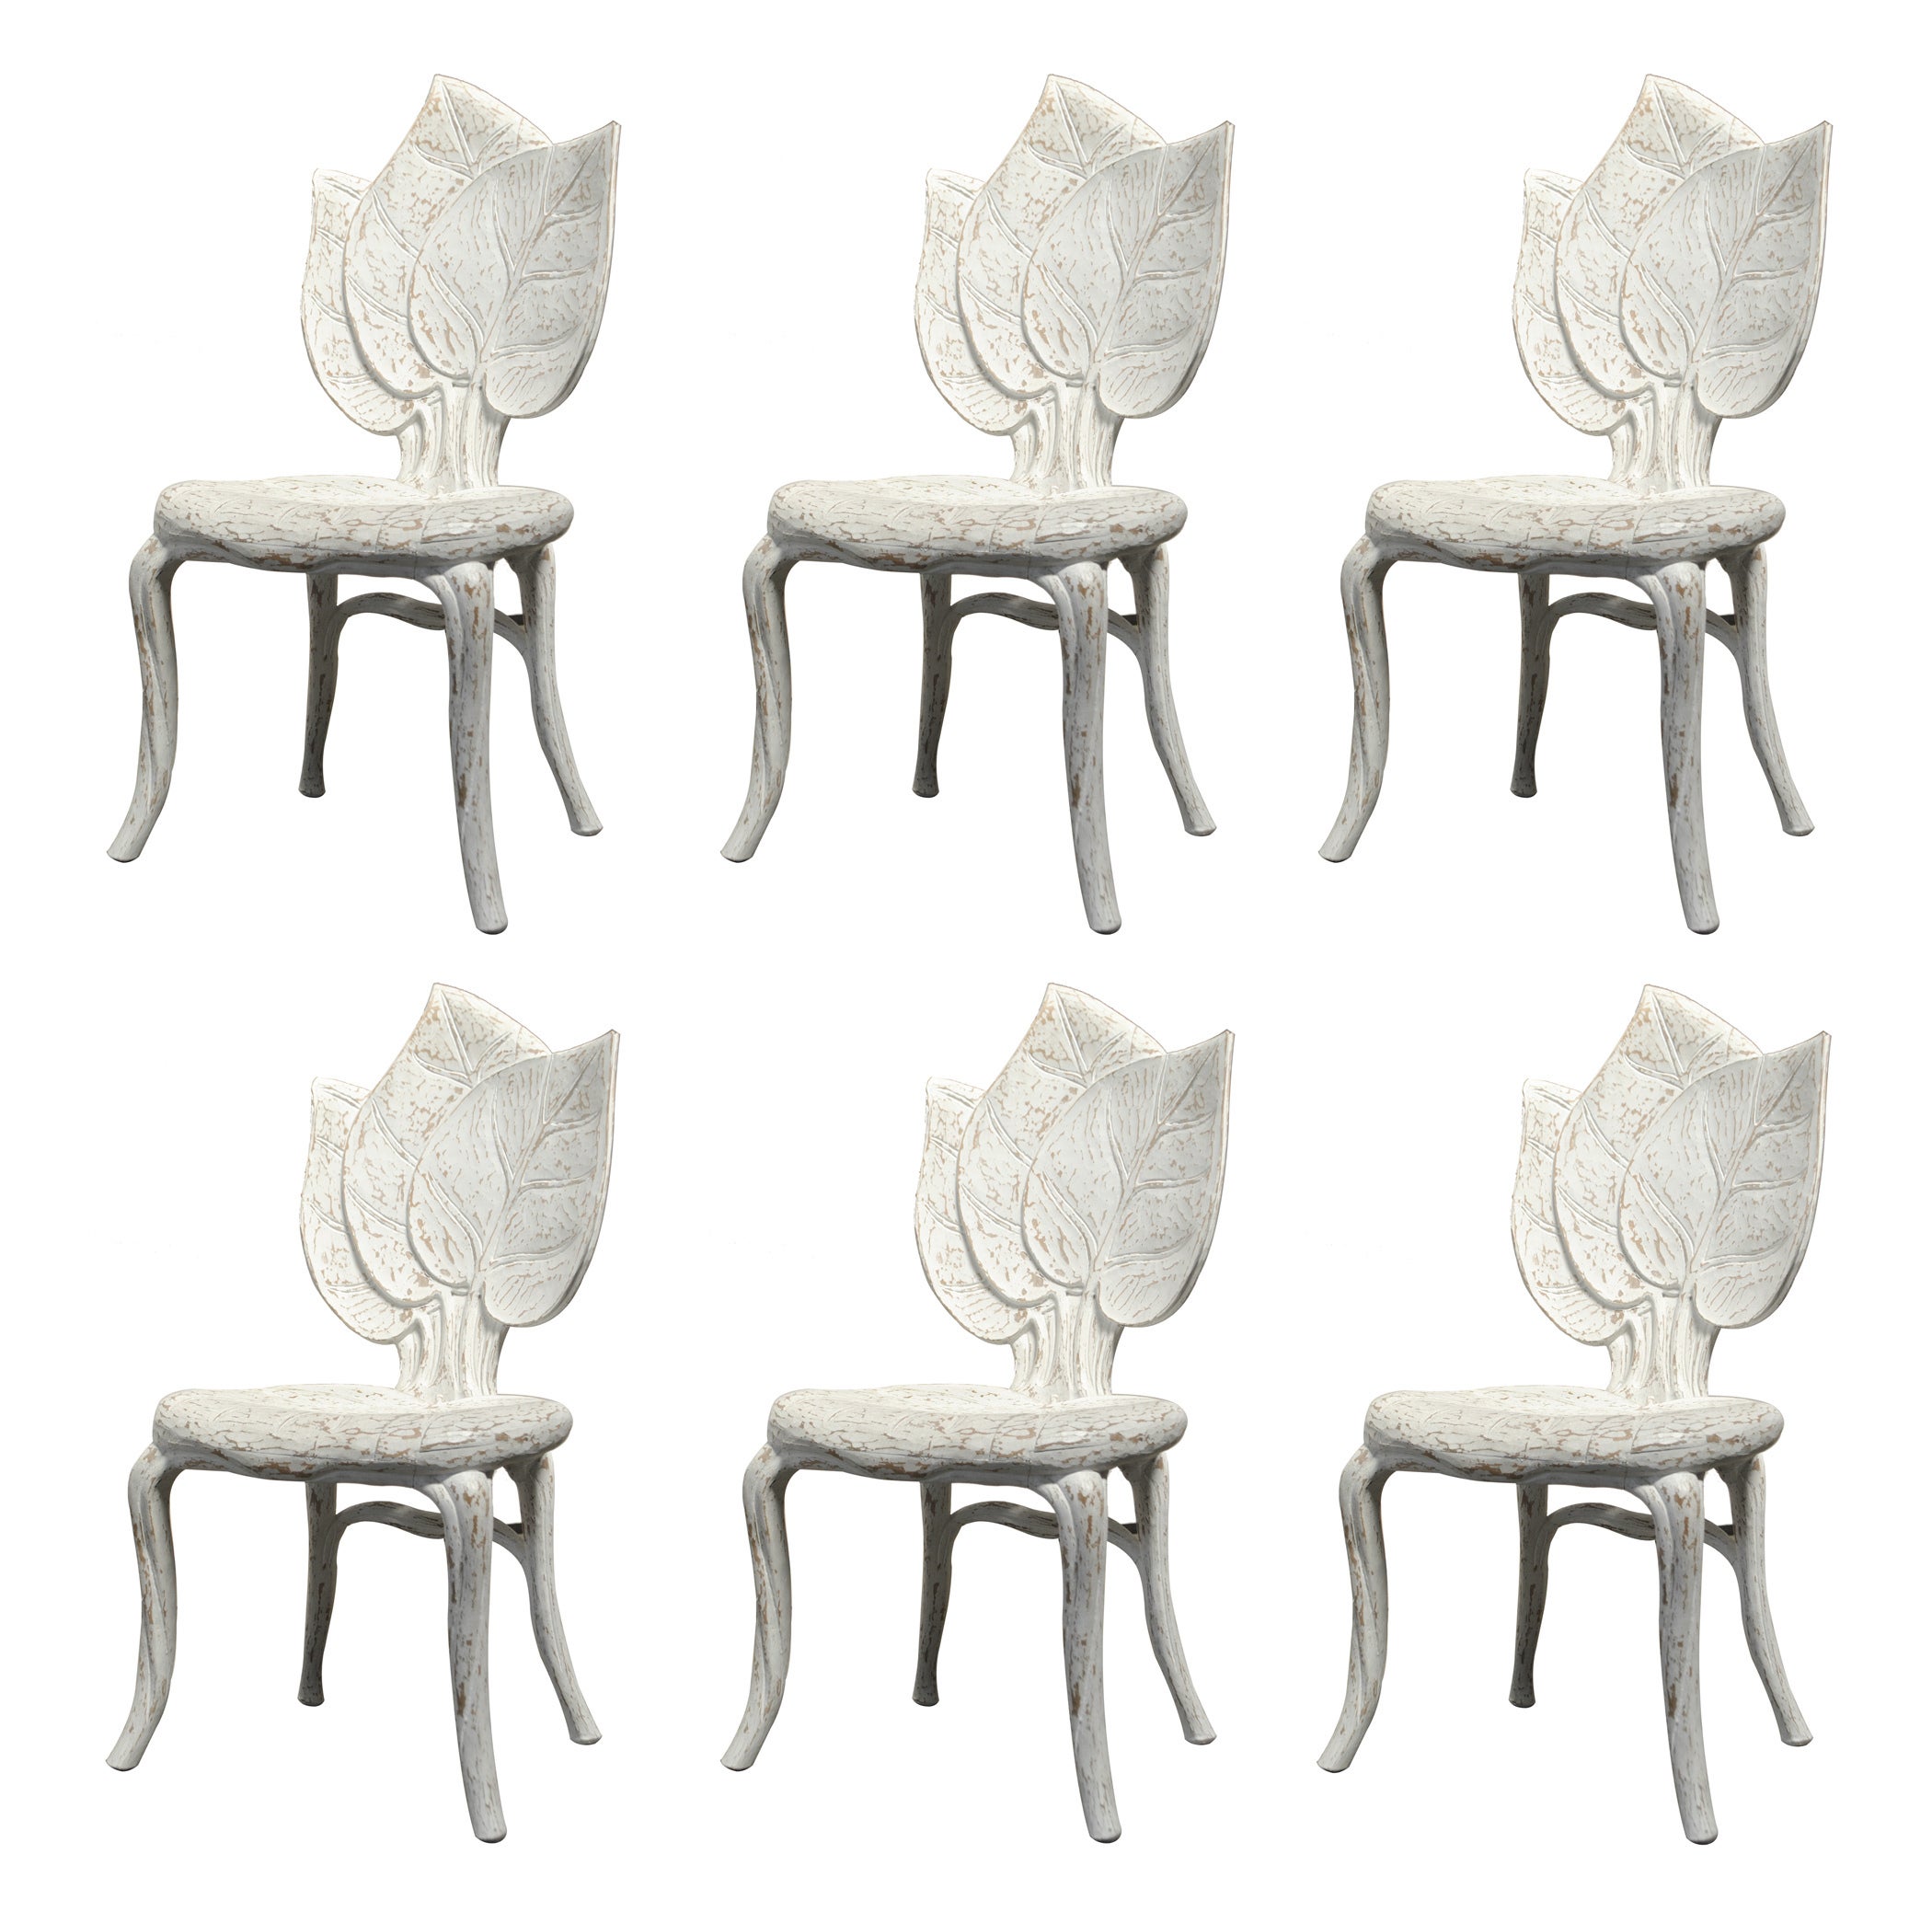 A Set of Six 1950s Handcarved "Leaf" Dining Chairs